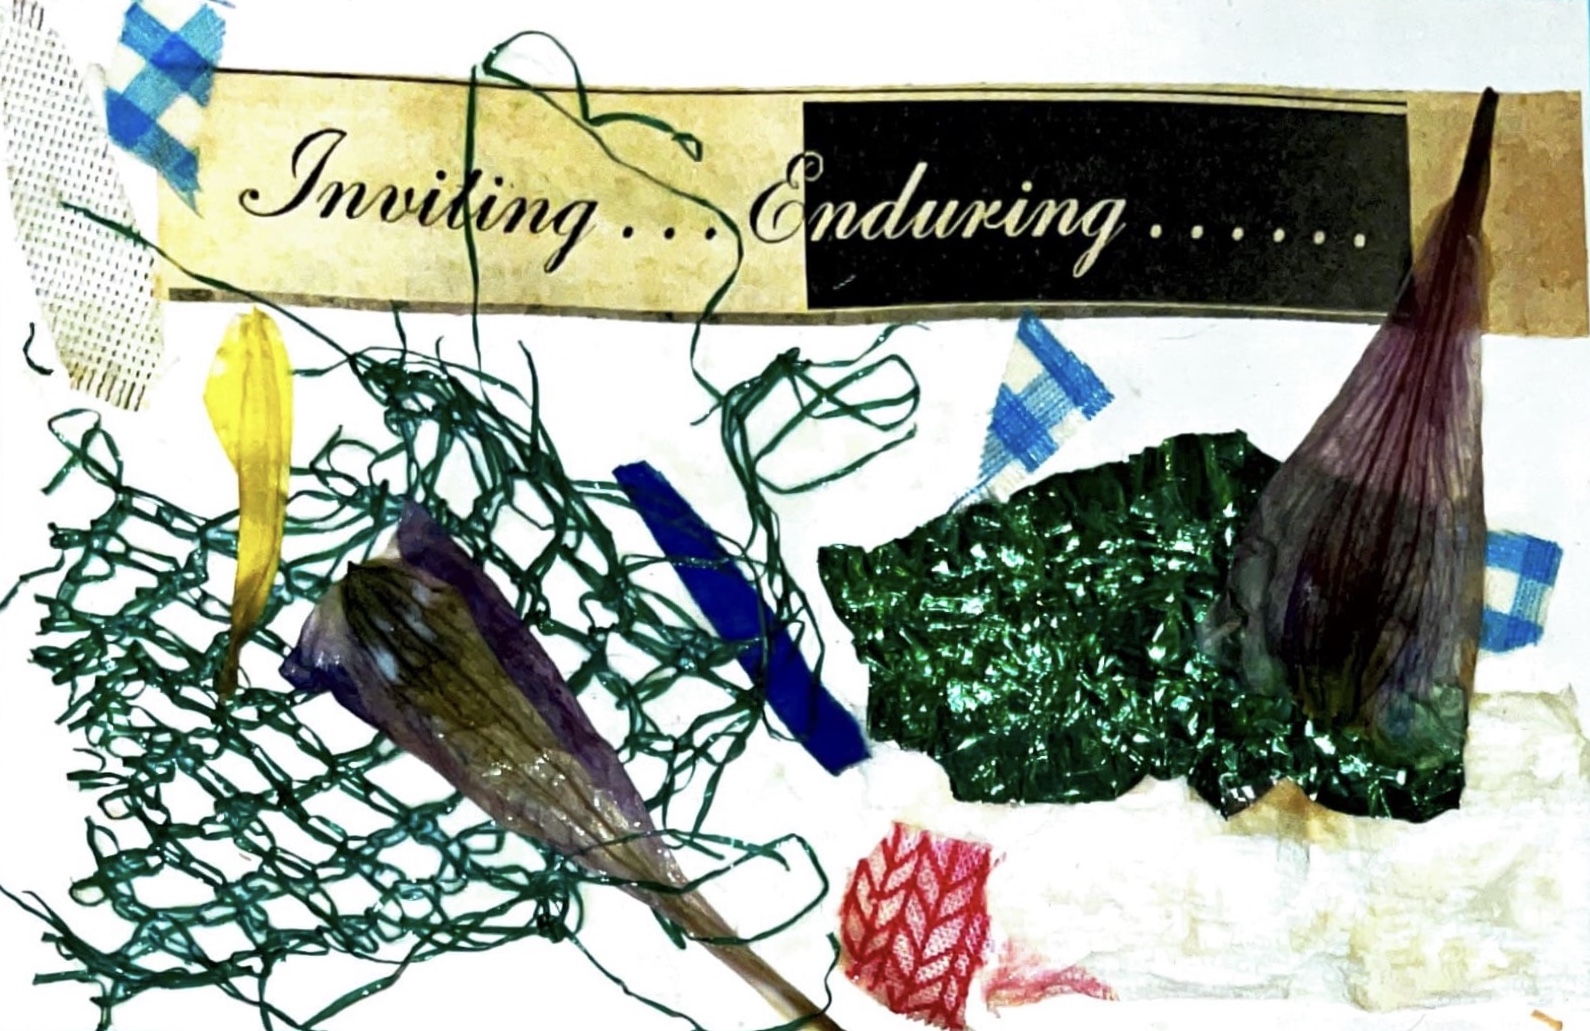 Collage with fragment of green netting, wilted petals, green metallic candy wrapper, and strip reading: Inviting... enduring...